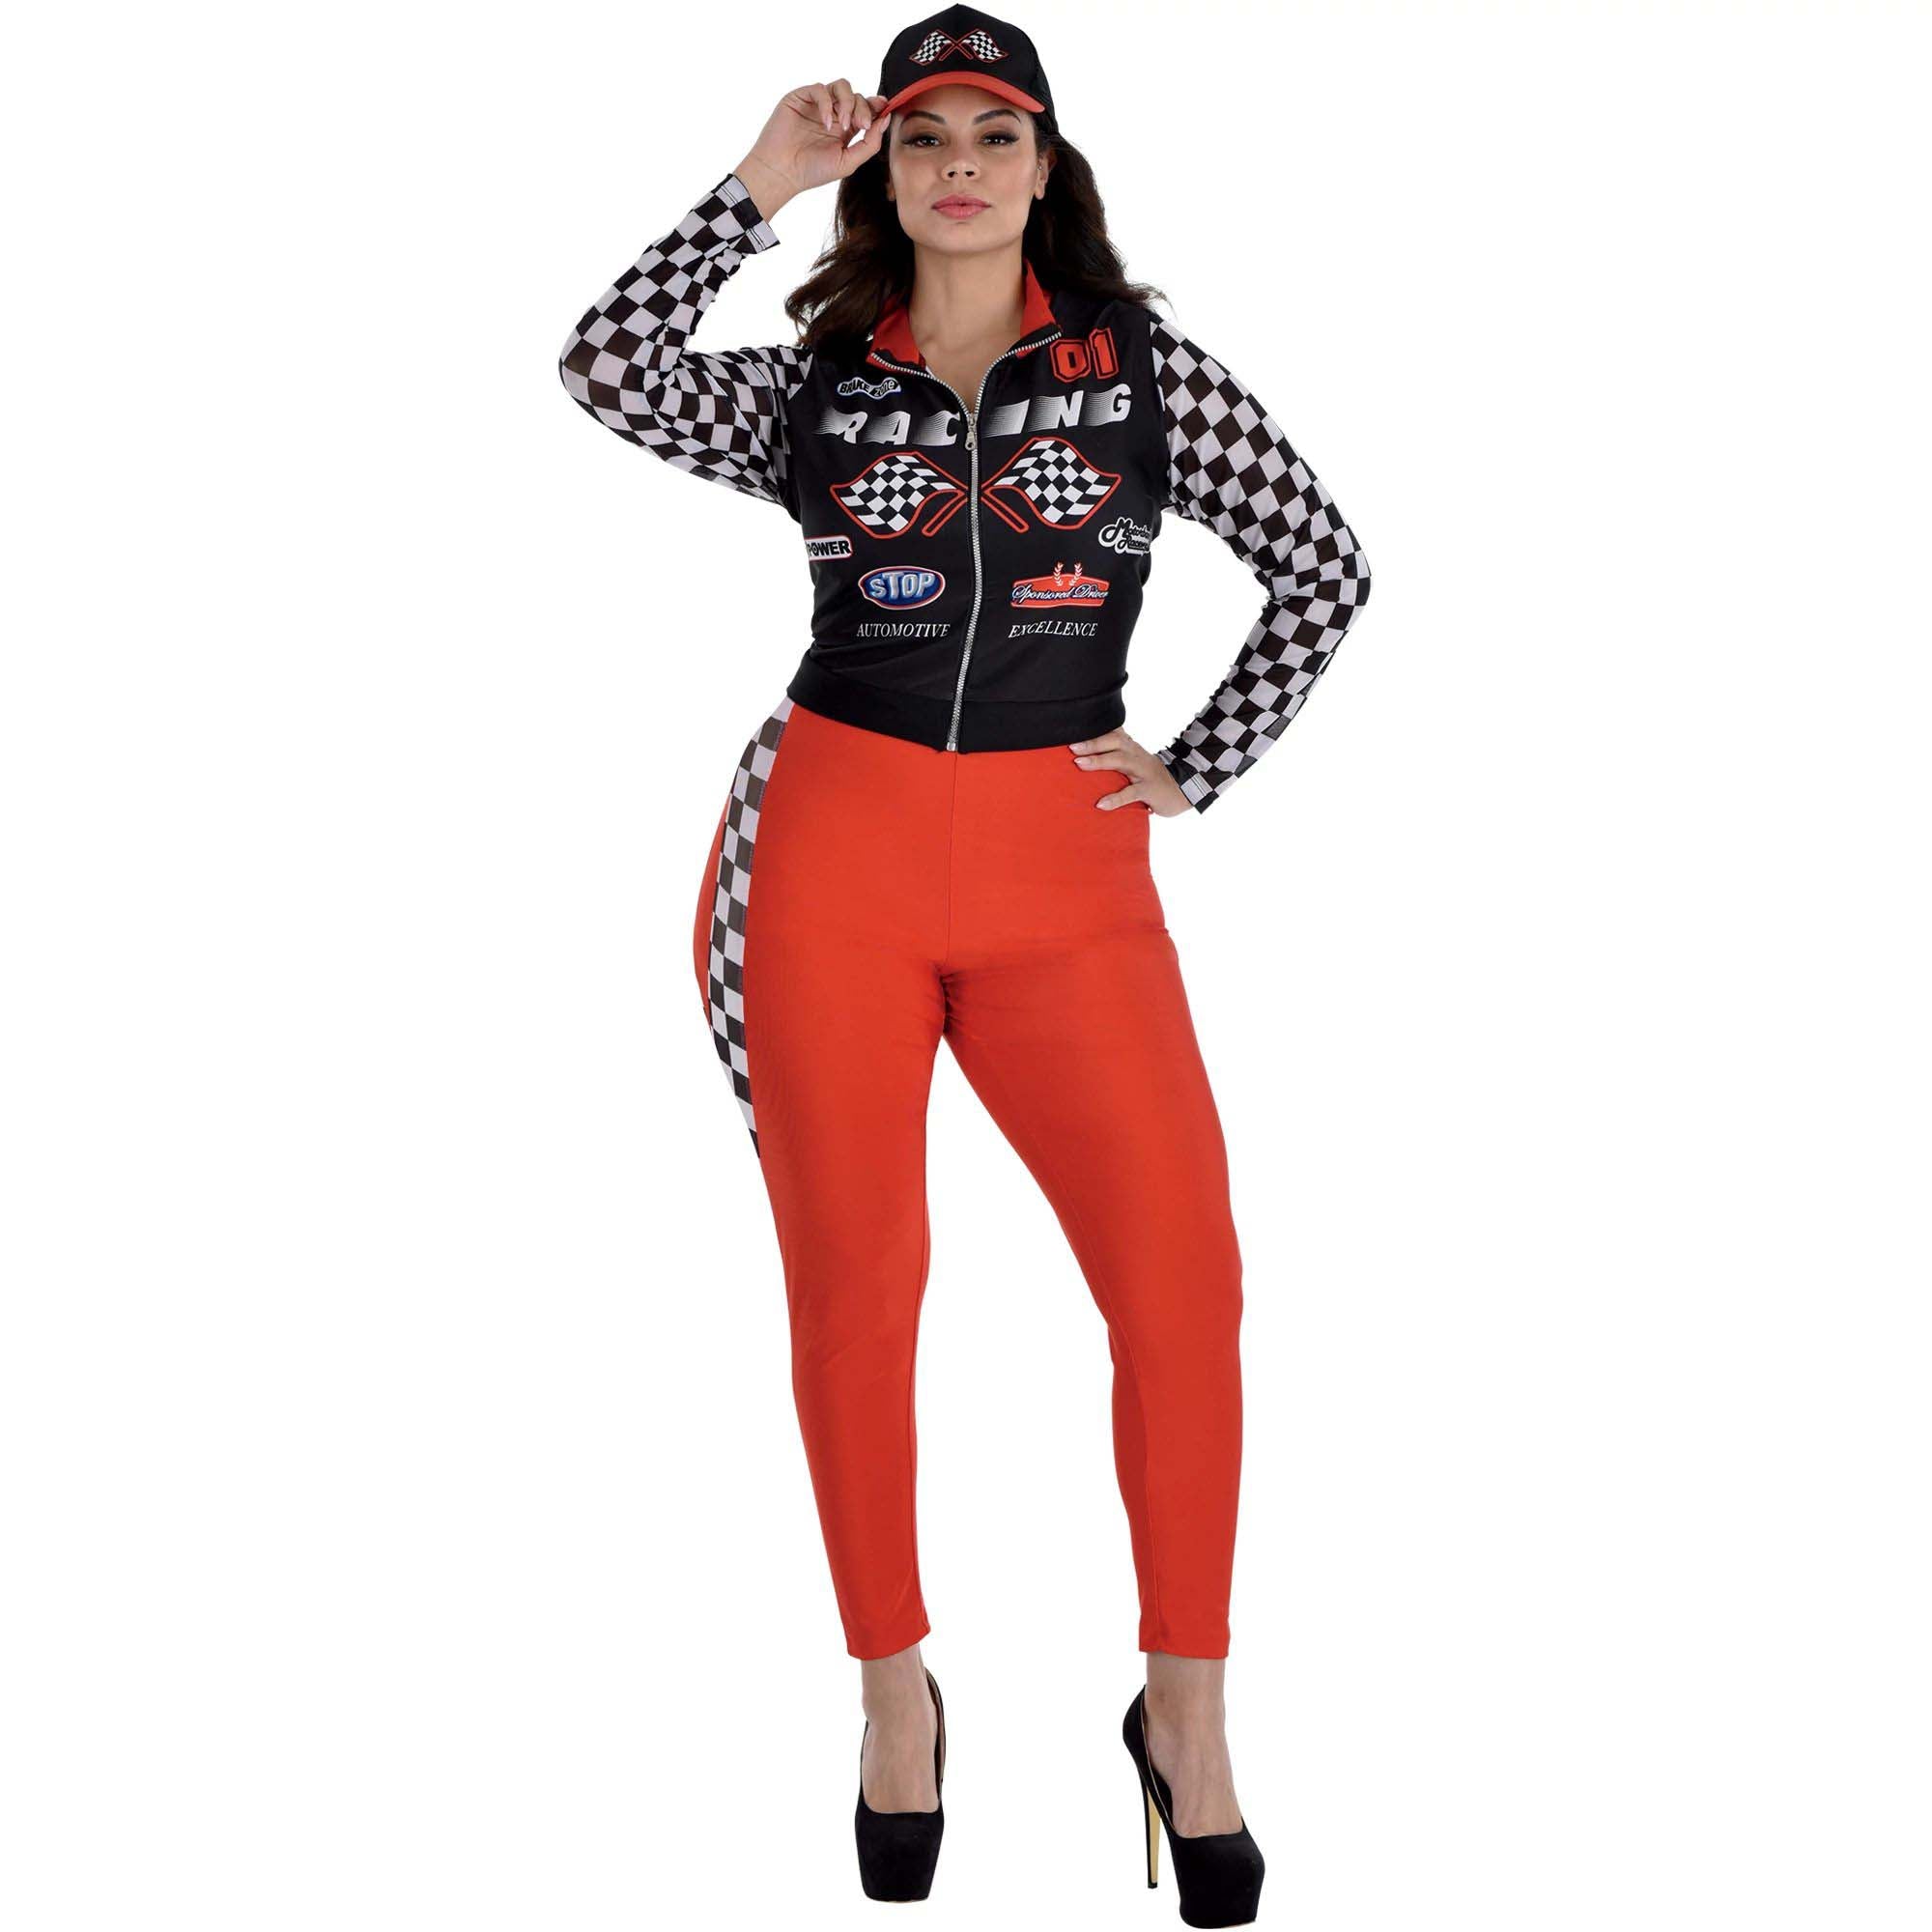 Racecar Driver Costume for Plus Size Adults, Jacket and Leggings